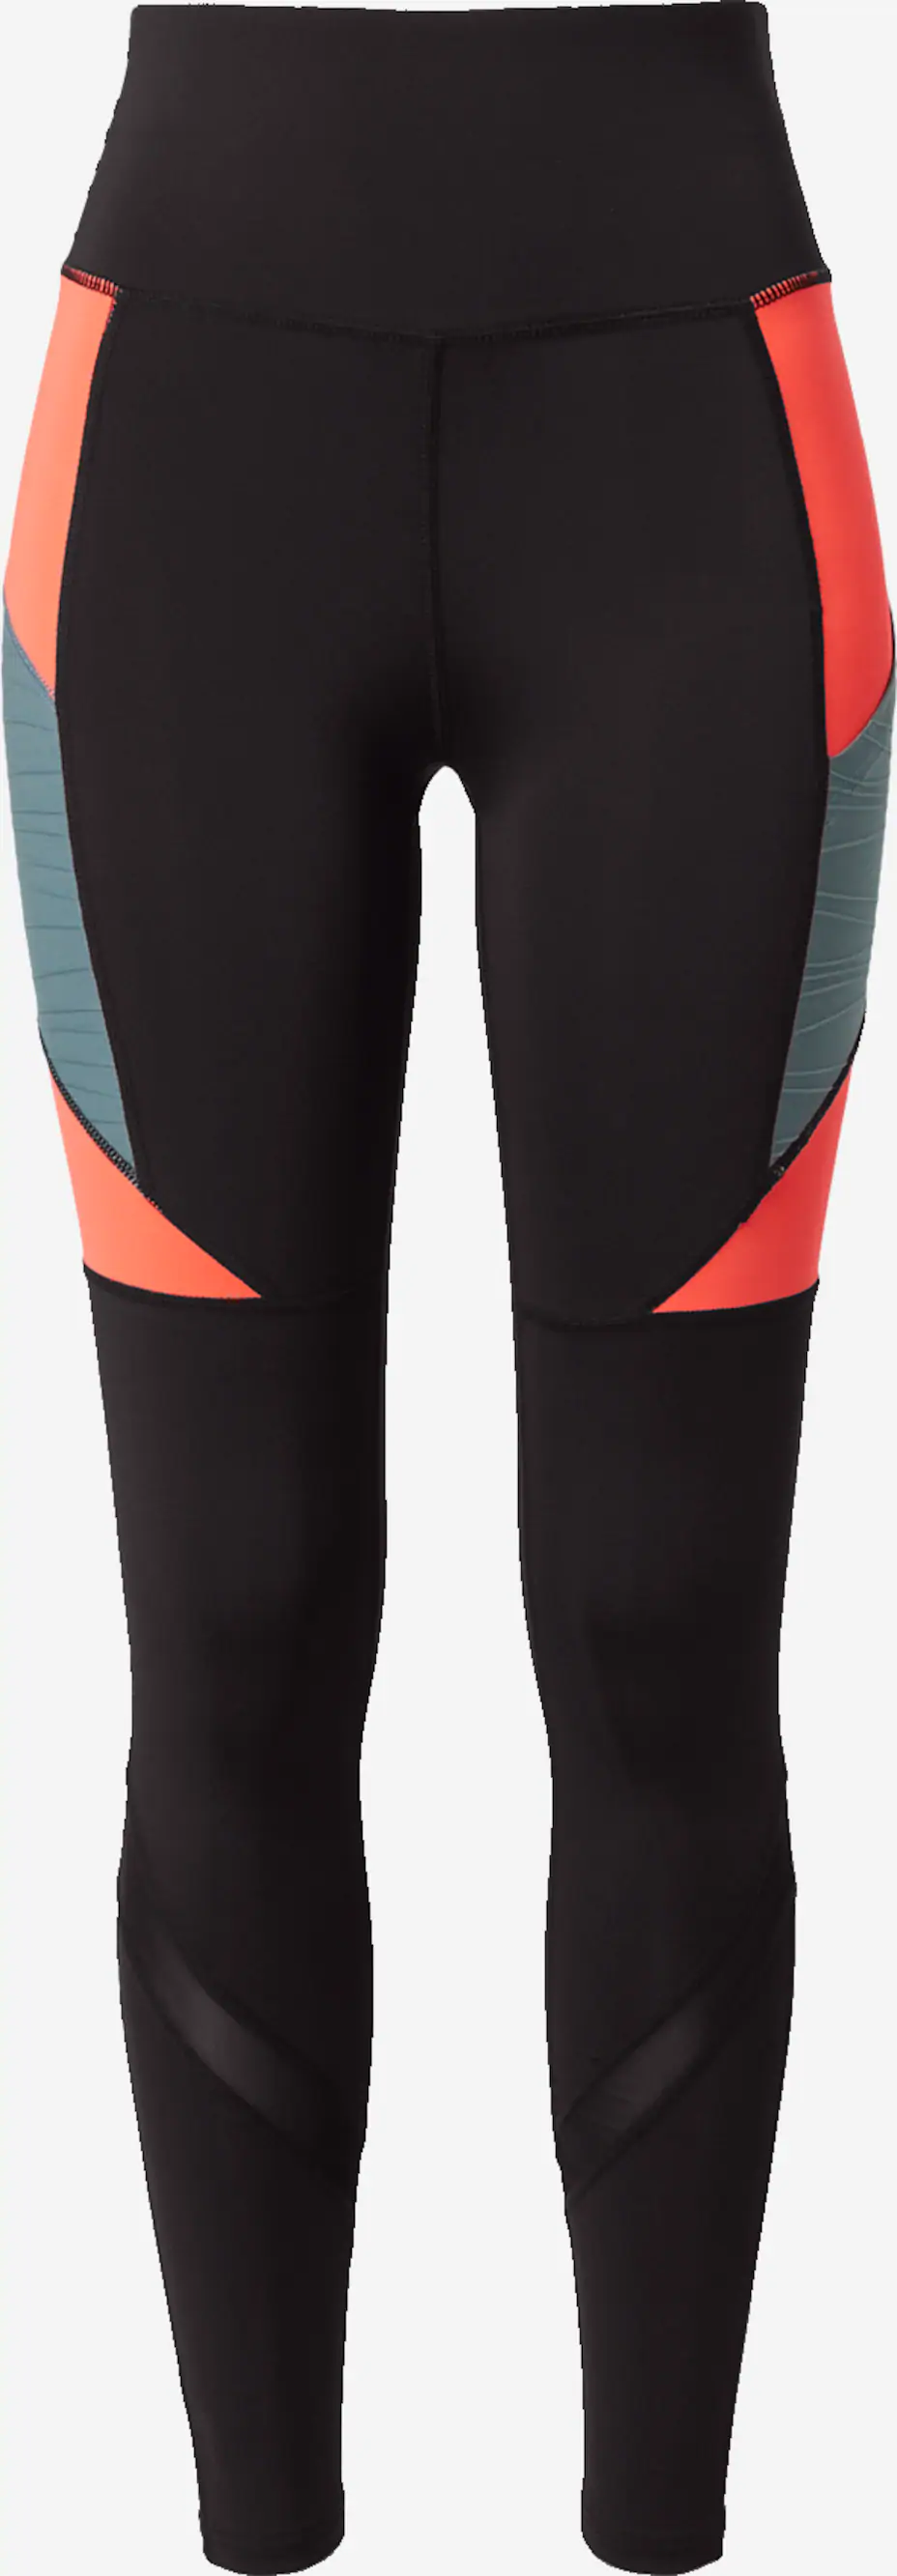 ONLY PLAY ALANI 7/8 TRAINING TIGHTS 15201823